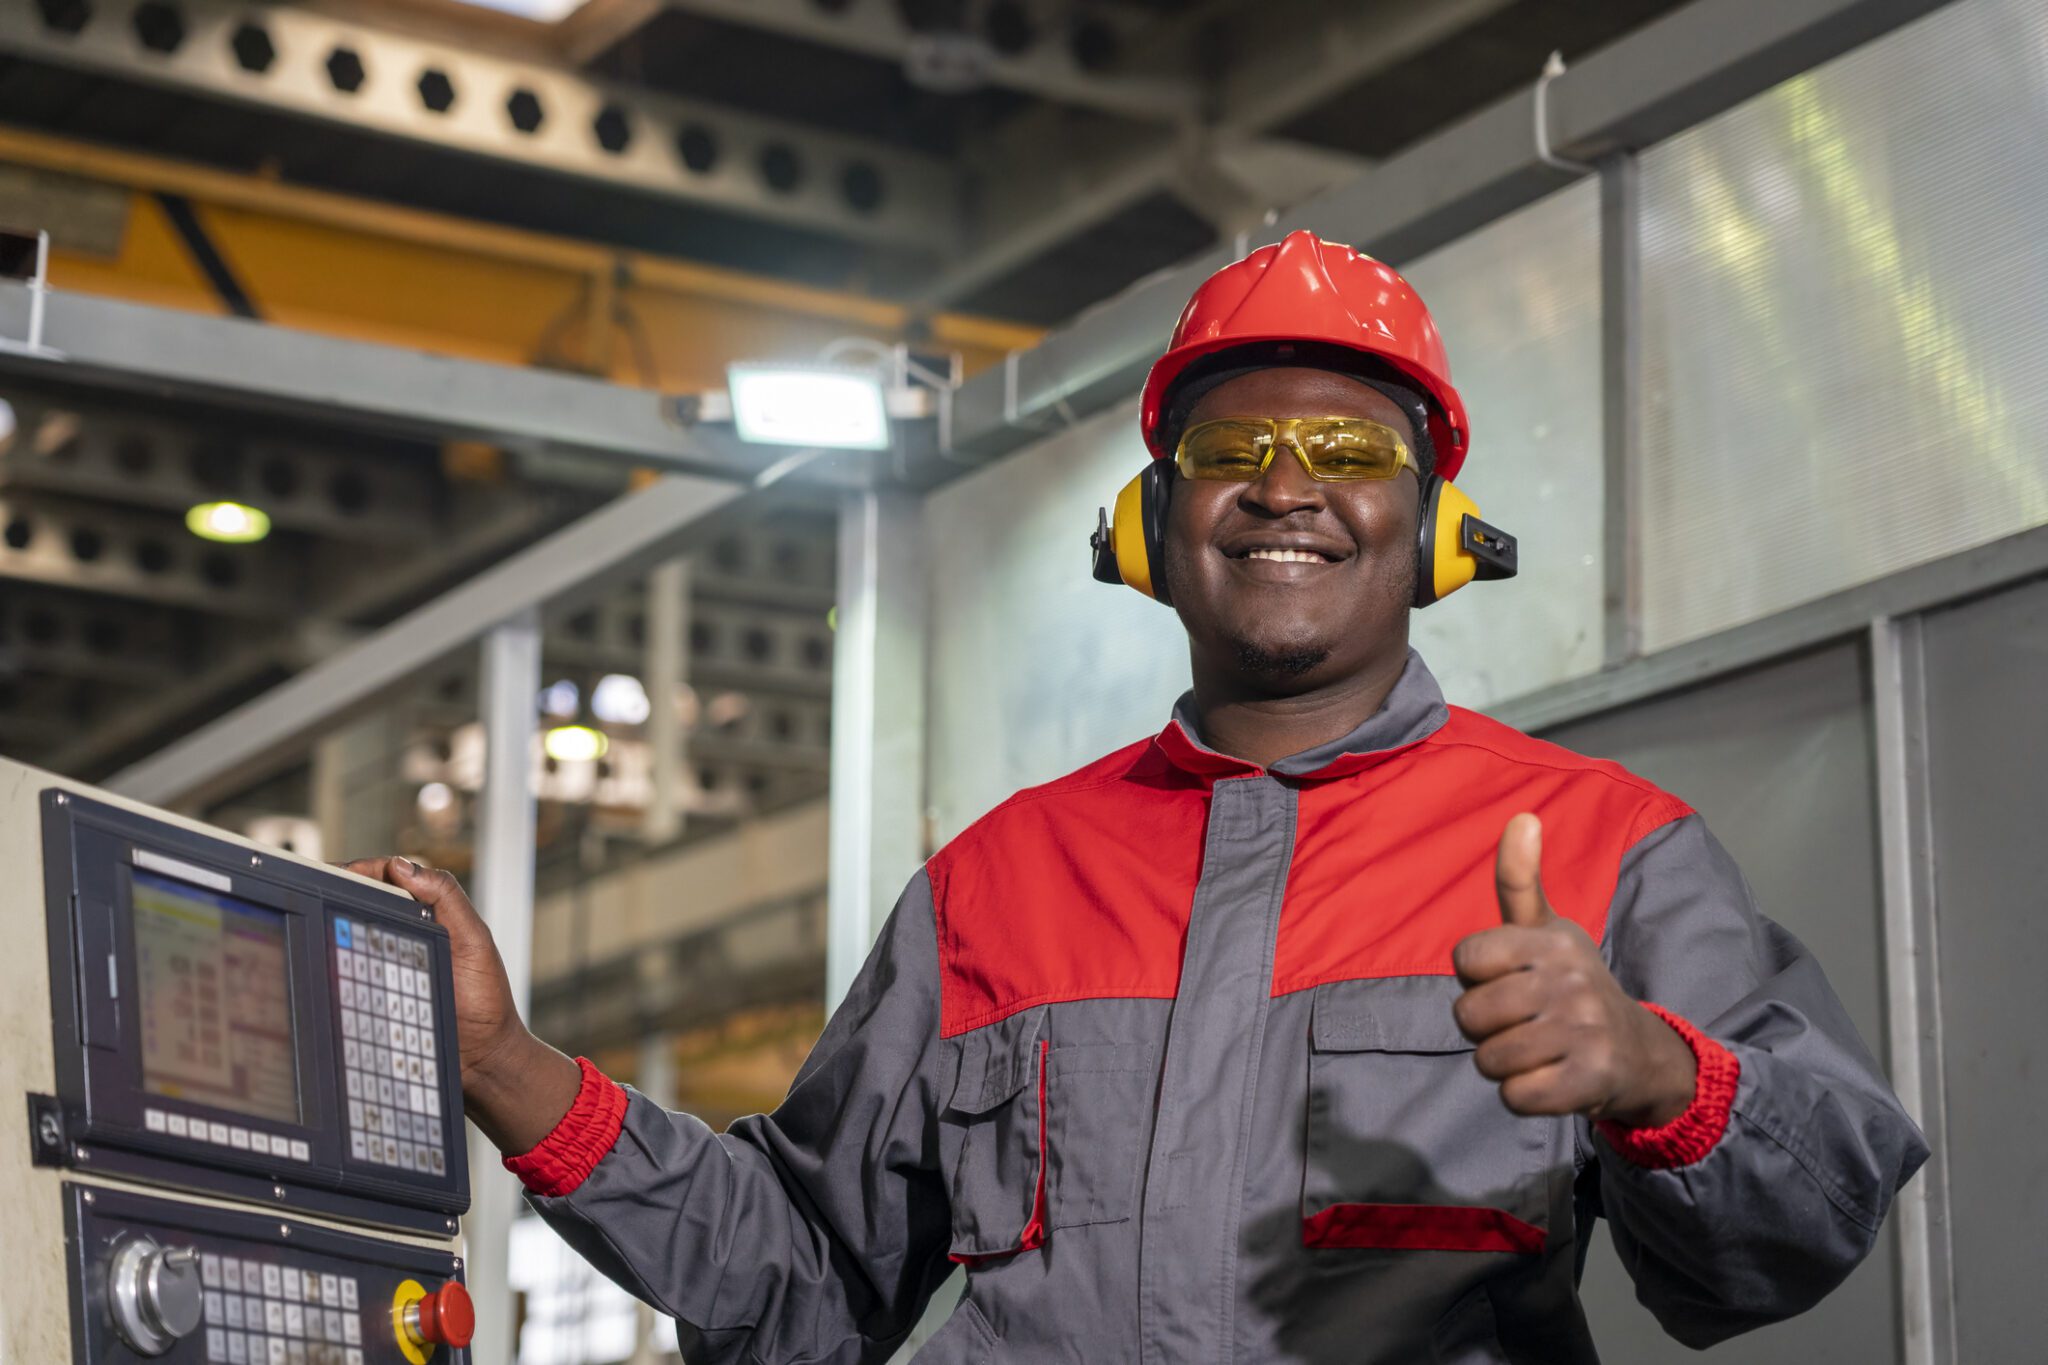 Portrait Of Black Machine Operator In Red Helmet, Safety Goggles, Hearing Protectors And Work Uniform.